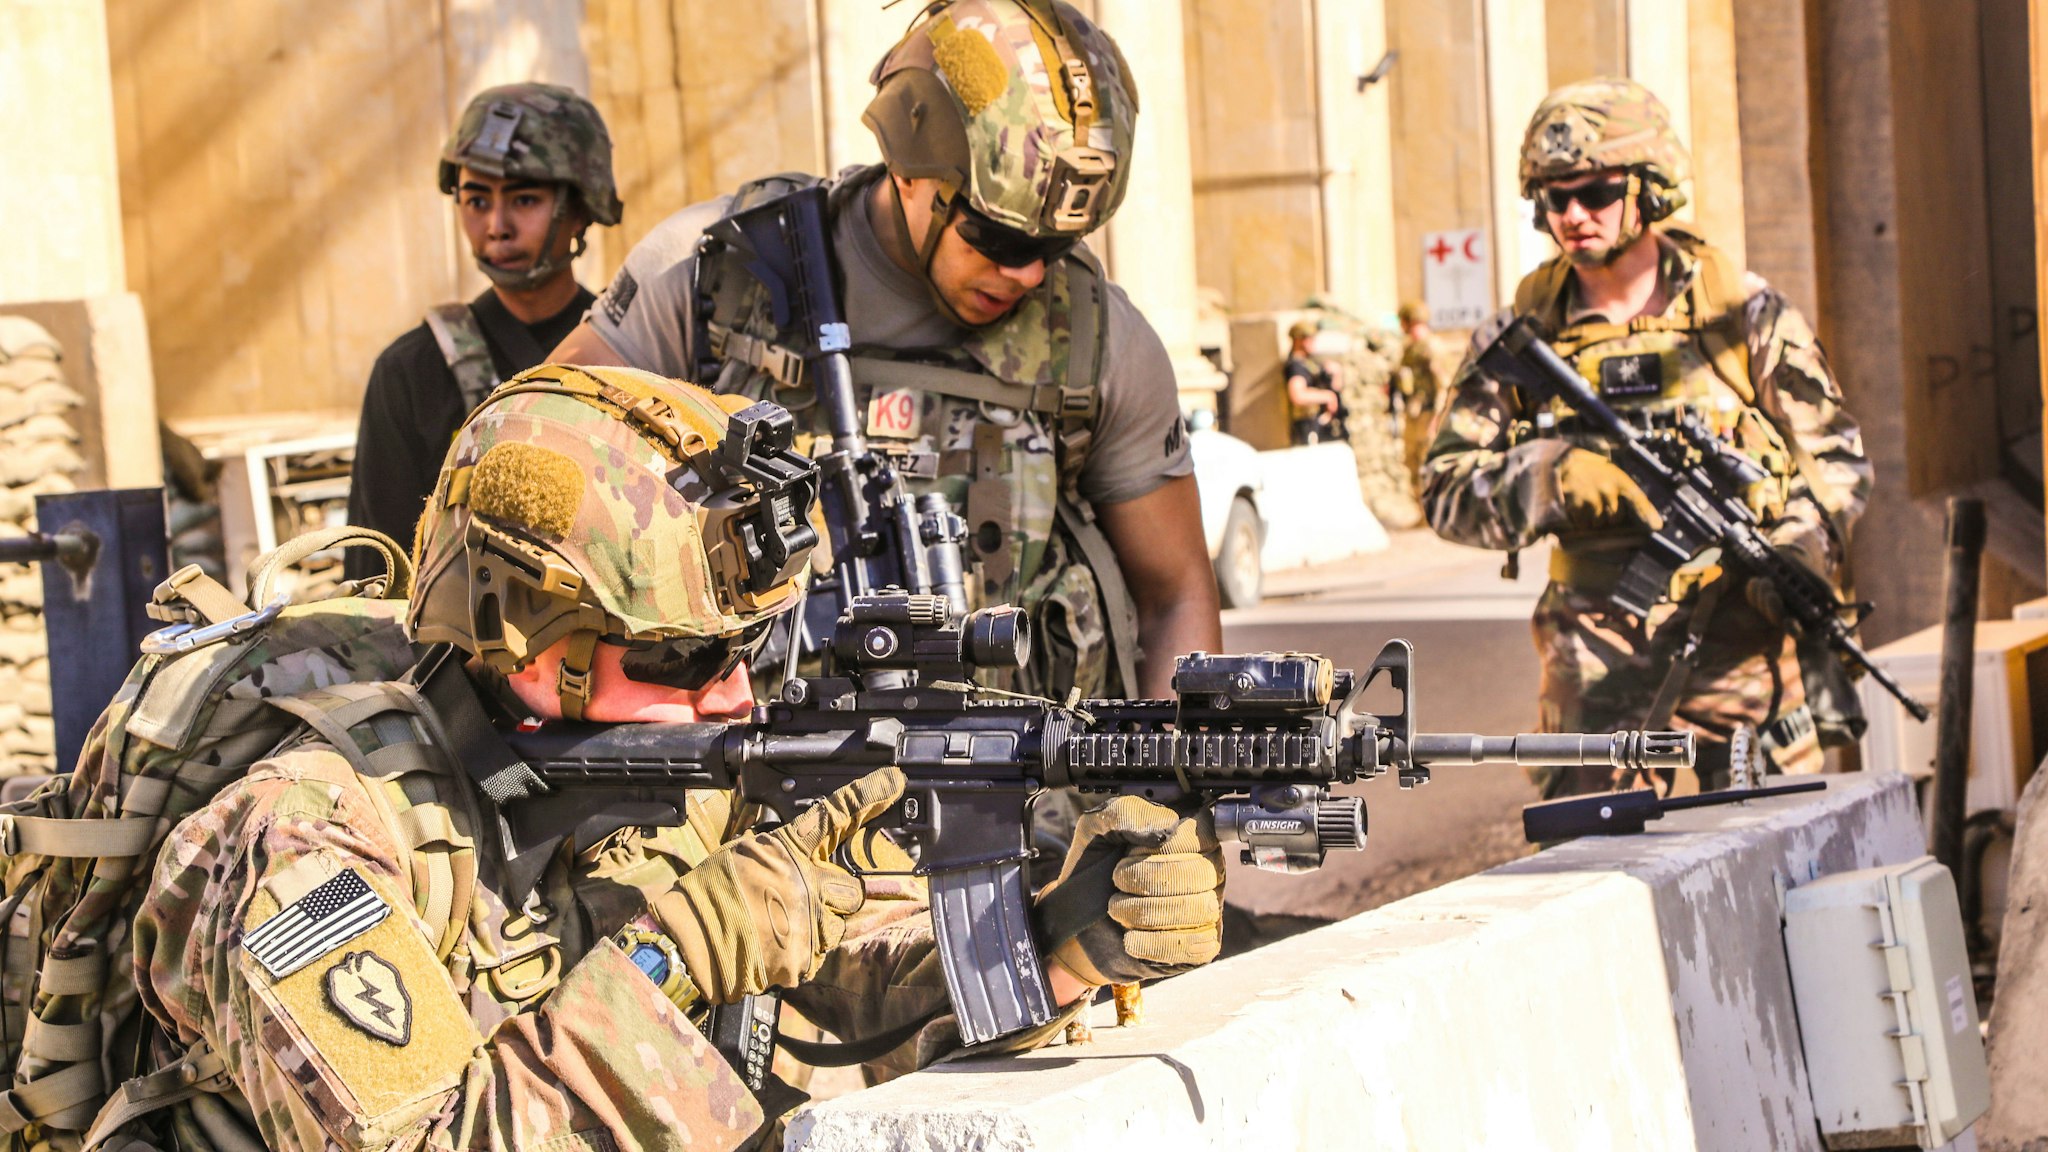 TOPSHOT - A handout picture received from the US embassy in Iraq on December 31, 2019, shows American soldiers taking position around the embassy in the capital Baghdad, after supporters and members of the Hashed al-Shaabi military network breached the outer wall of the diplomatic mission during a rally to vent anger over weekend air strikes that killed pro-Iran fighters in western Iraq. - The US State Department said that embassy personnel are safe and there are no plans to evacuate, after Iraqi supporters of pro-Iran factions attacked the compound. It is the first time in years that protesters have been able to reach the building, sheltered behind a series of checkpoints in the high-security Green Zone.